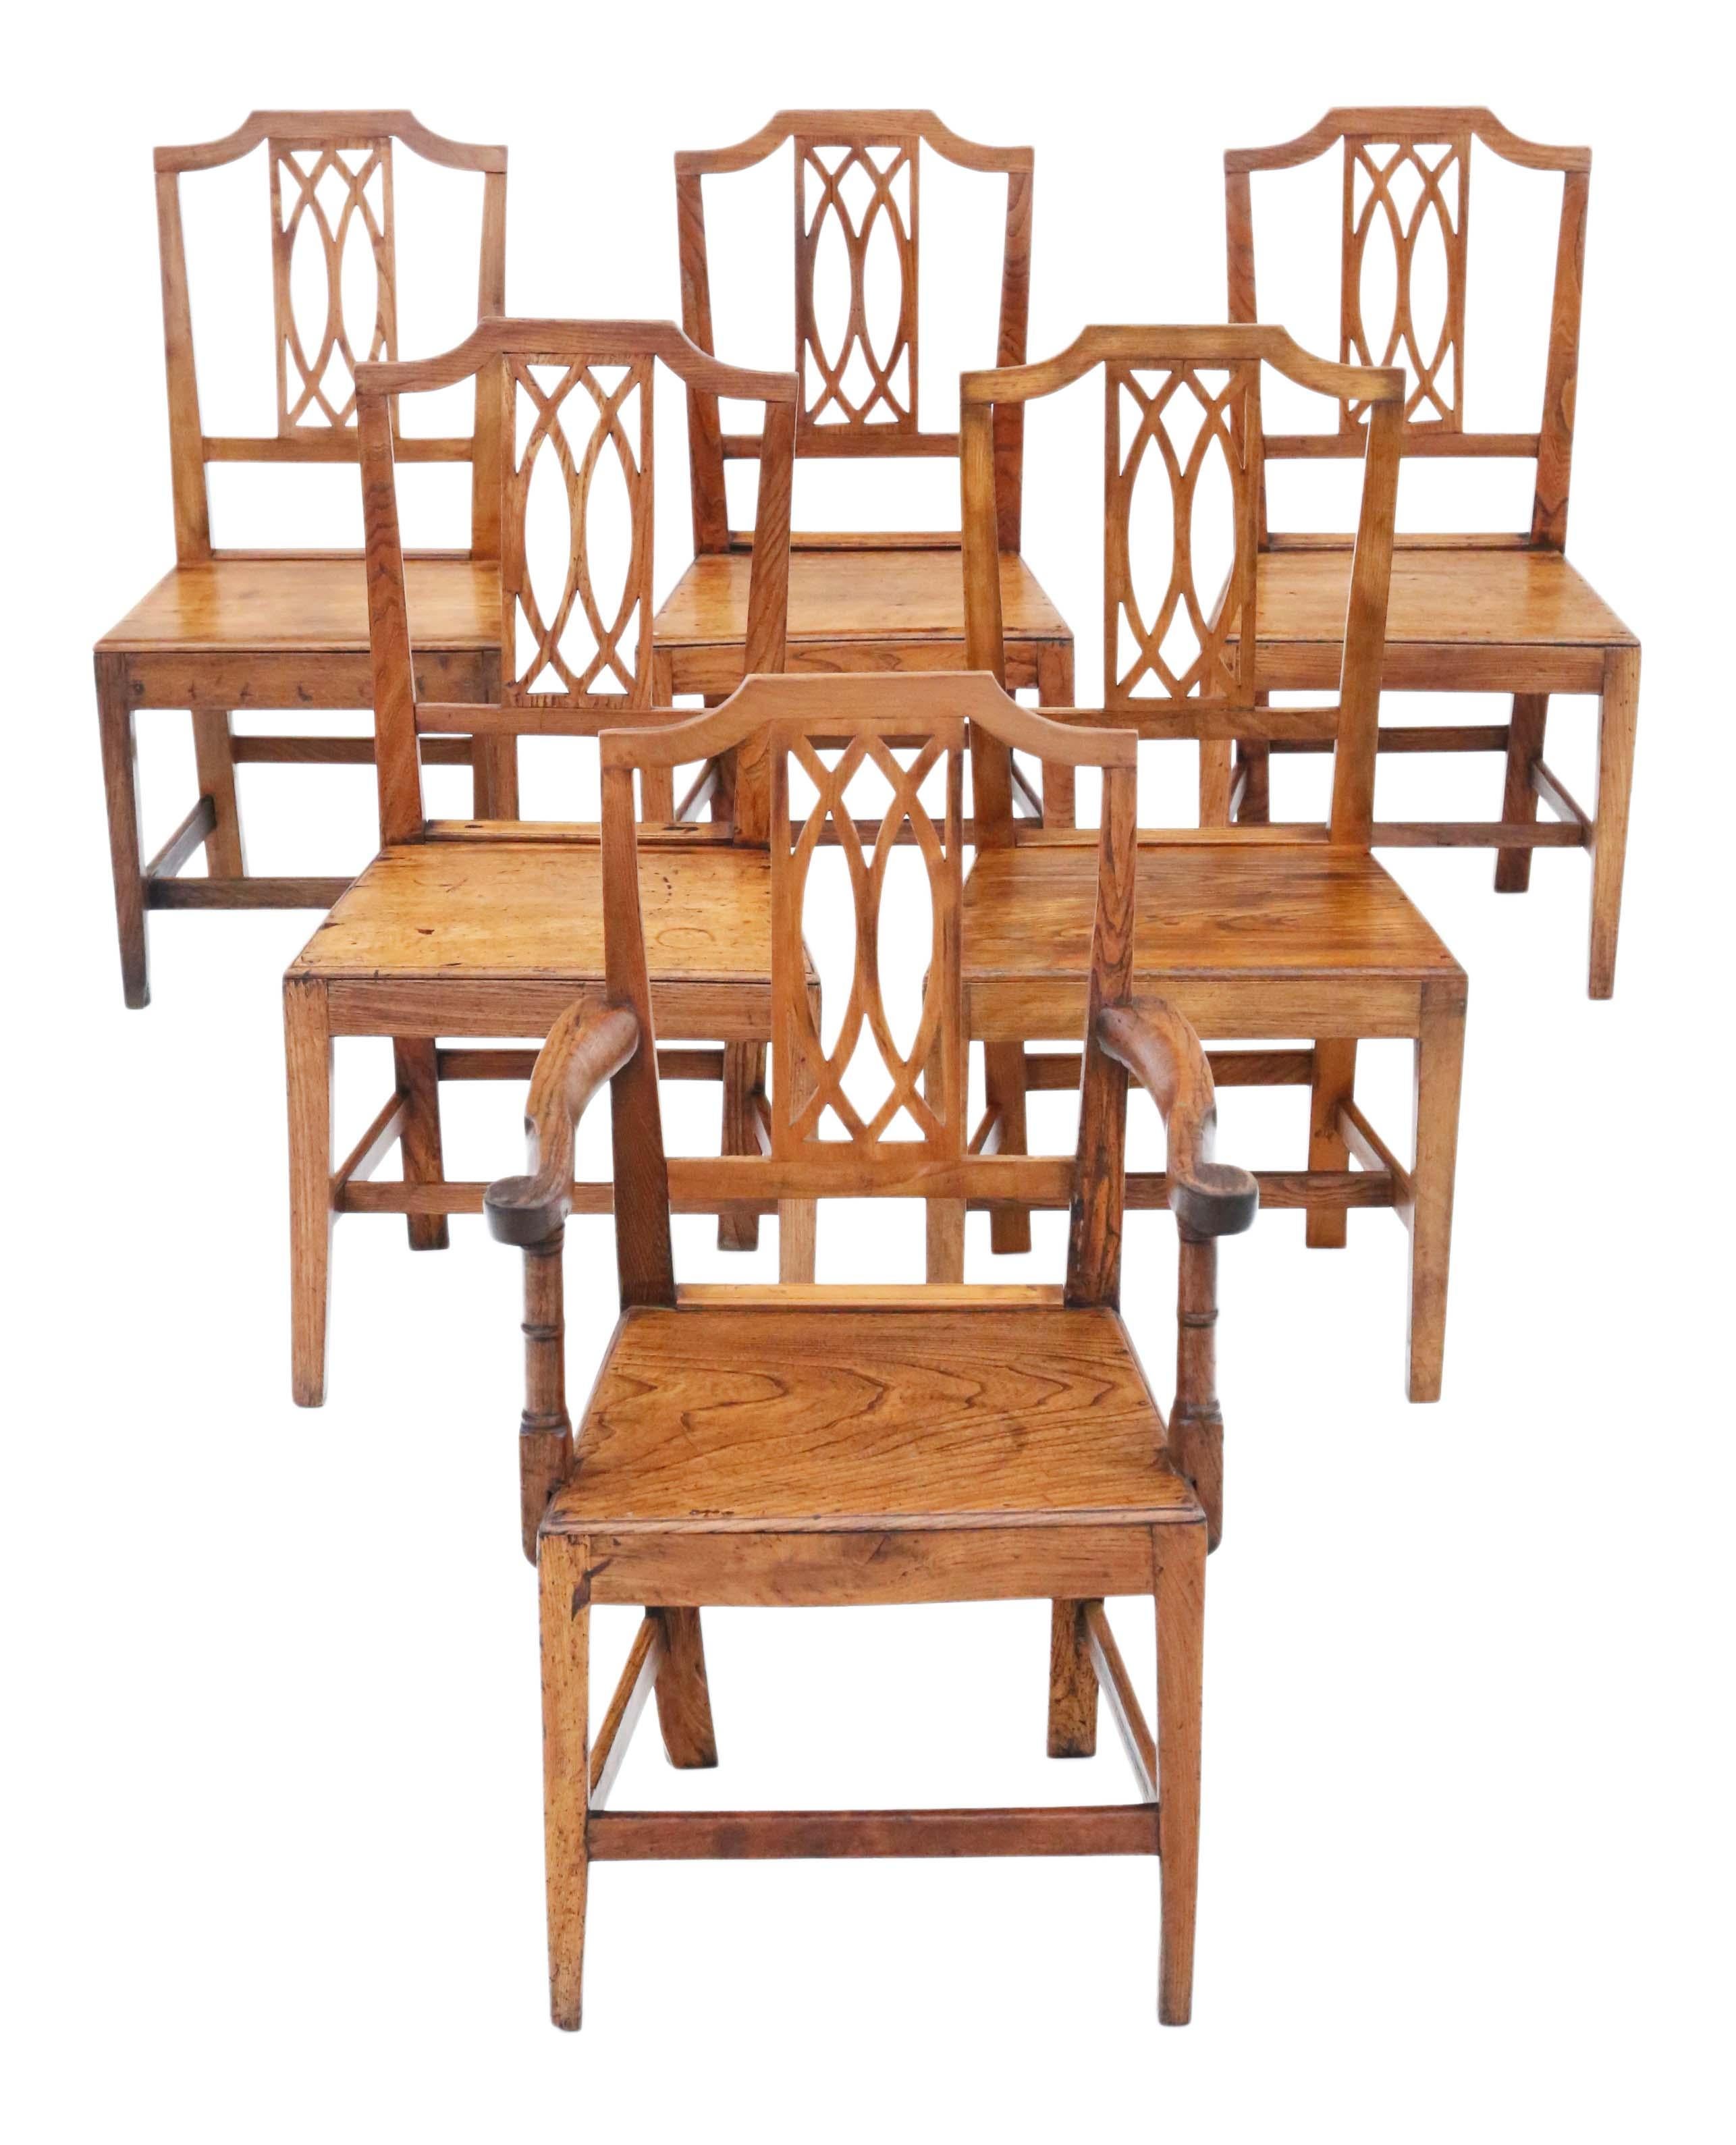 Discover the rare elegance of this antique set of 6 (5 chairs plus 1 carver) 19th Century elm kitchen dining chairs, boasting a design that is truly unique. These chairs are a testament to quality craftsmanship, with solid construction and no loose